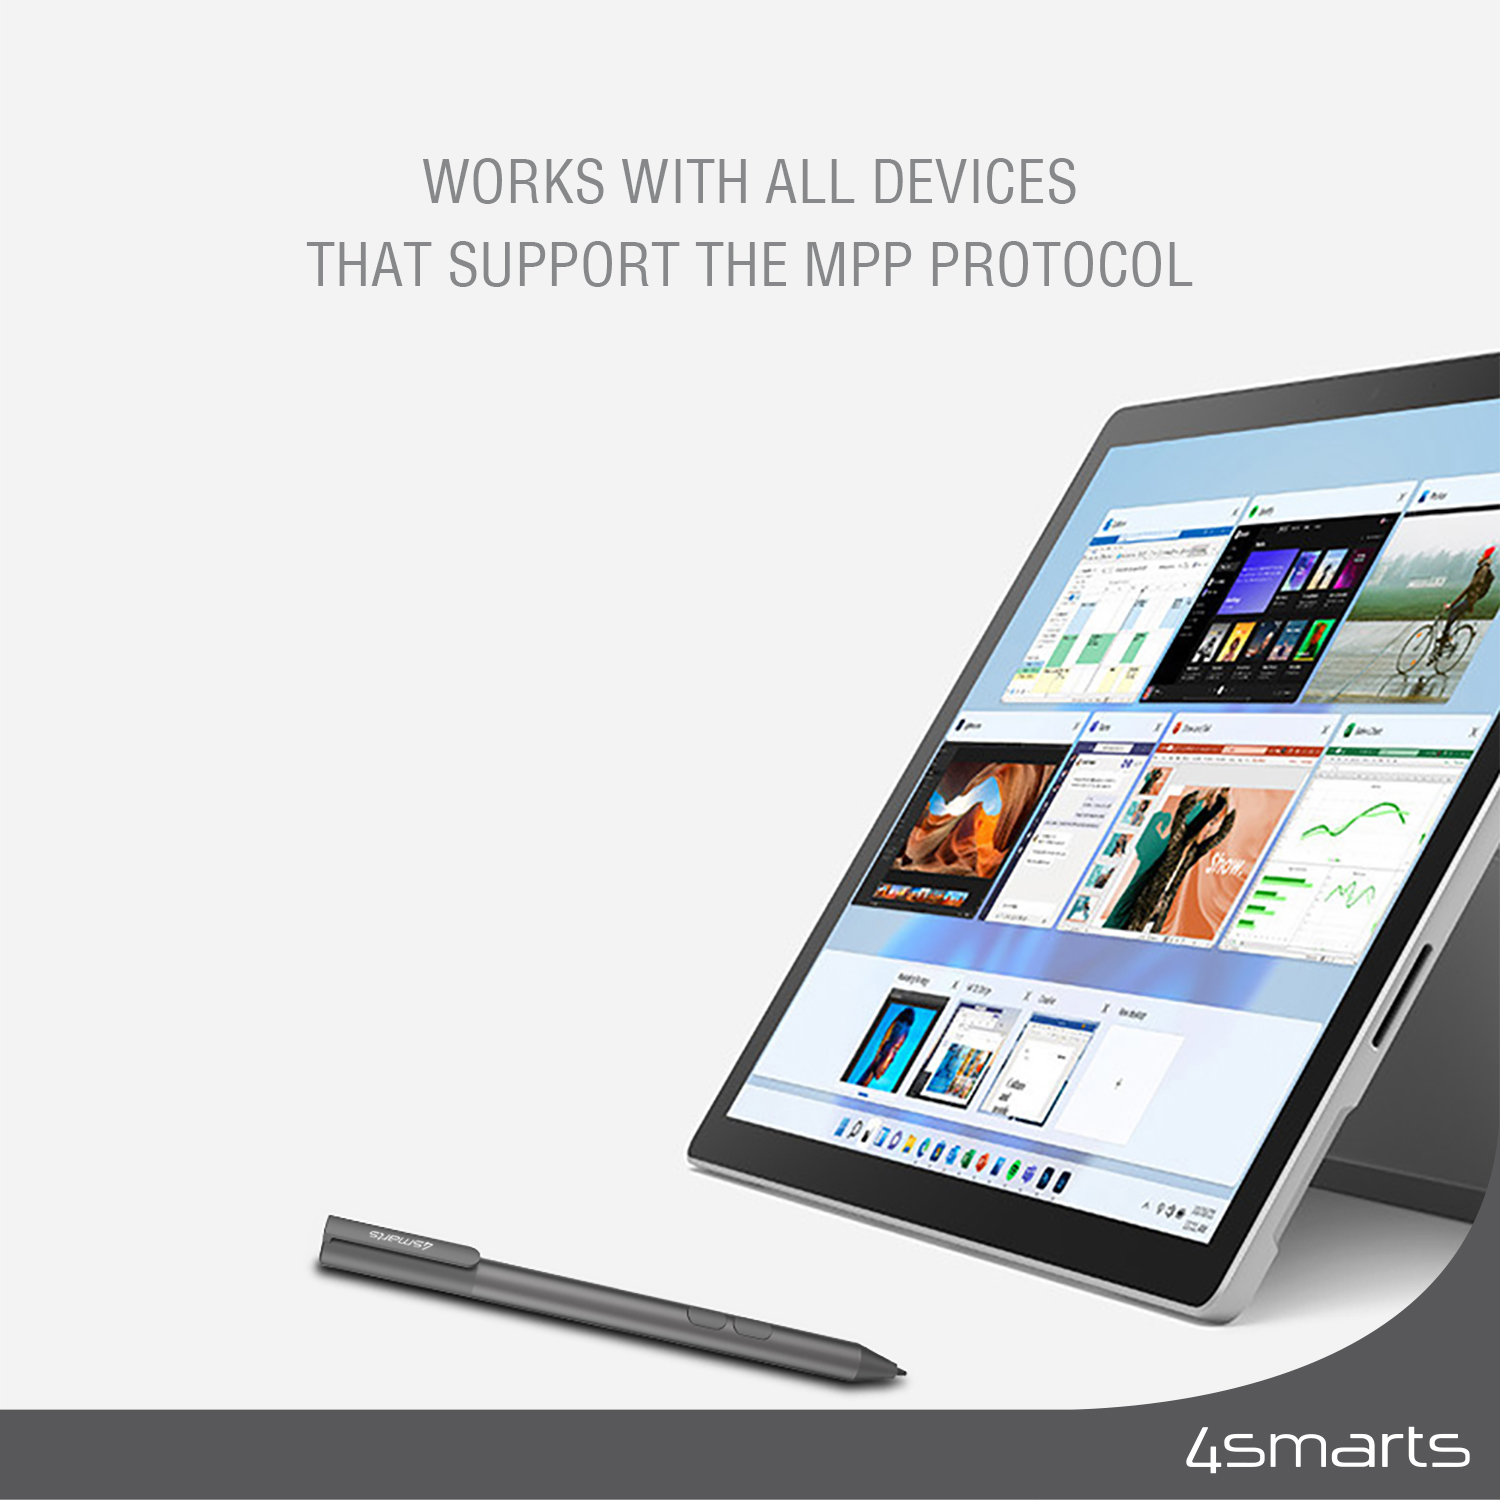 Your 4smarts Stylus Pen is compatible with the MPP1.51 protocol, i.e. with all devices that support this protocol, whether you have a tablet, a smartphone or a laptop.